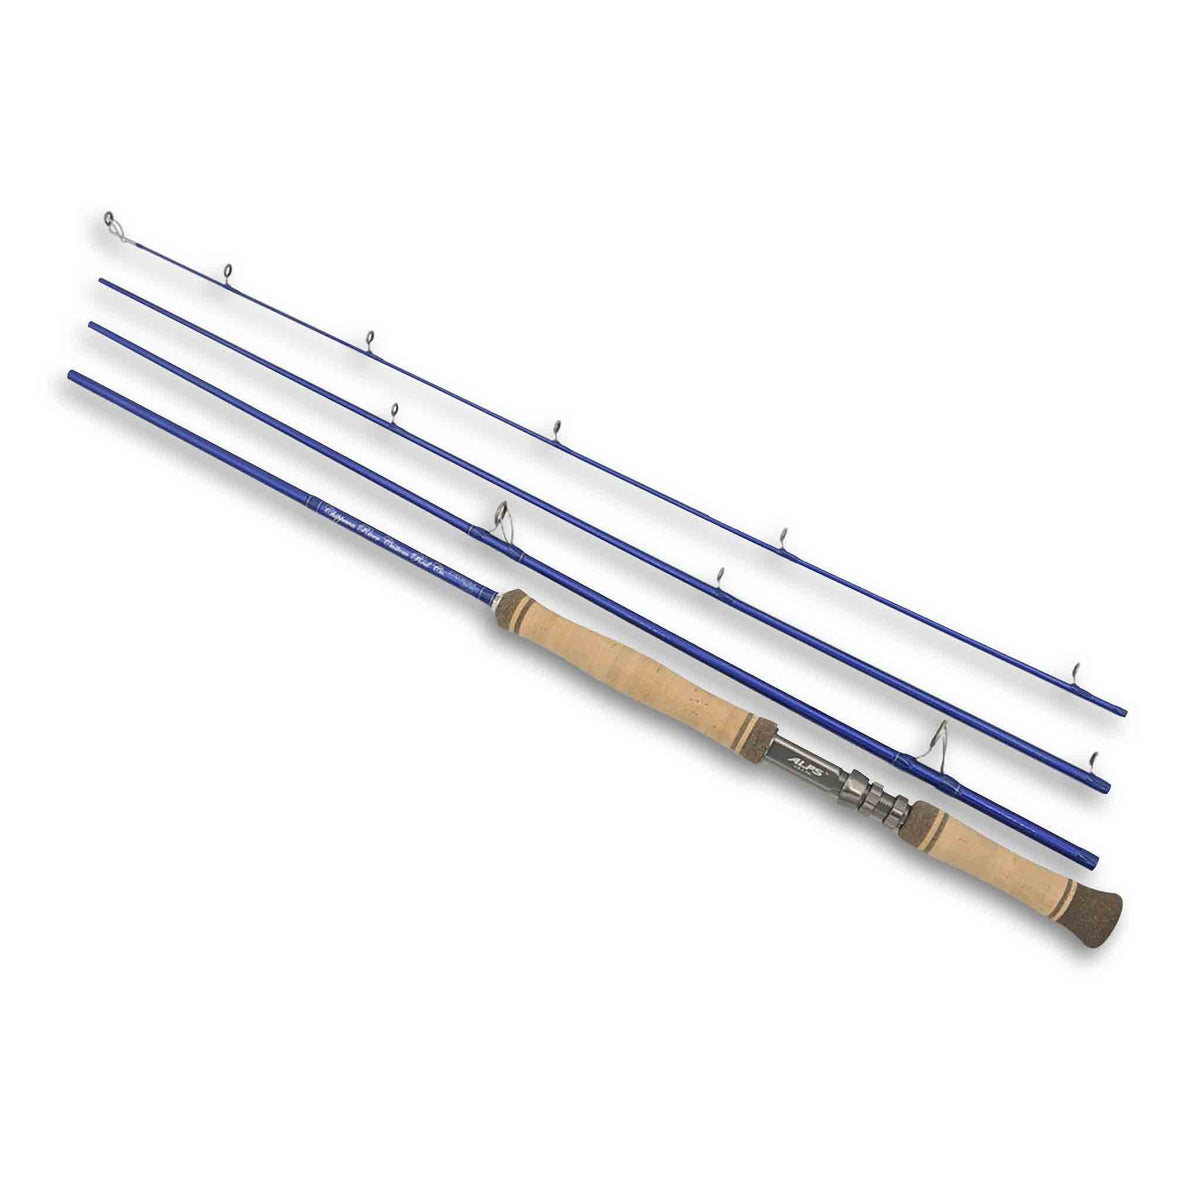 TFO Fly Fishing Rod 9 ft Item Fishing Rods 9 wt Line Weight